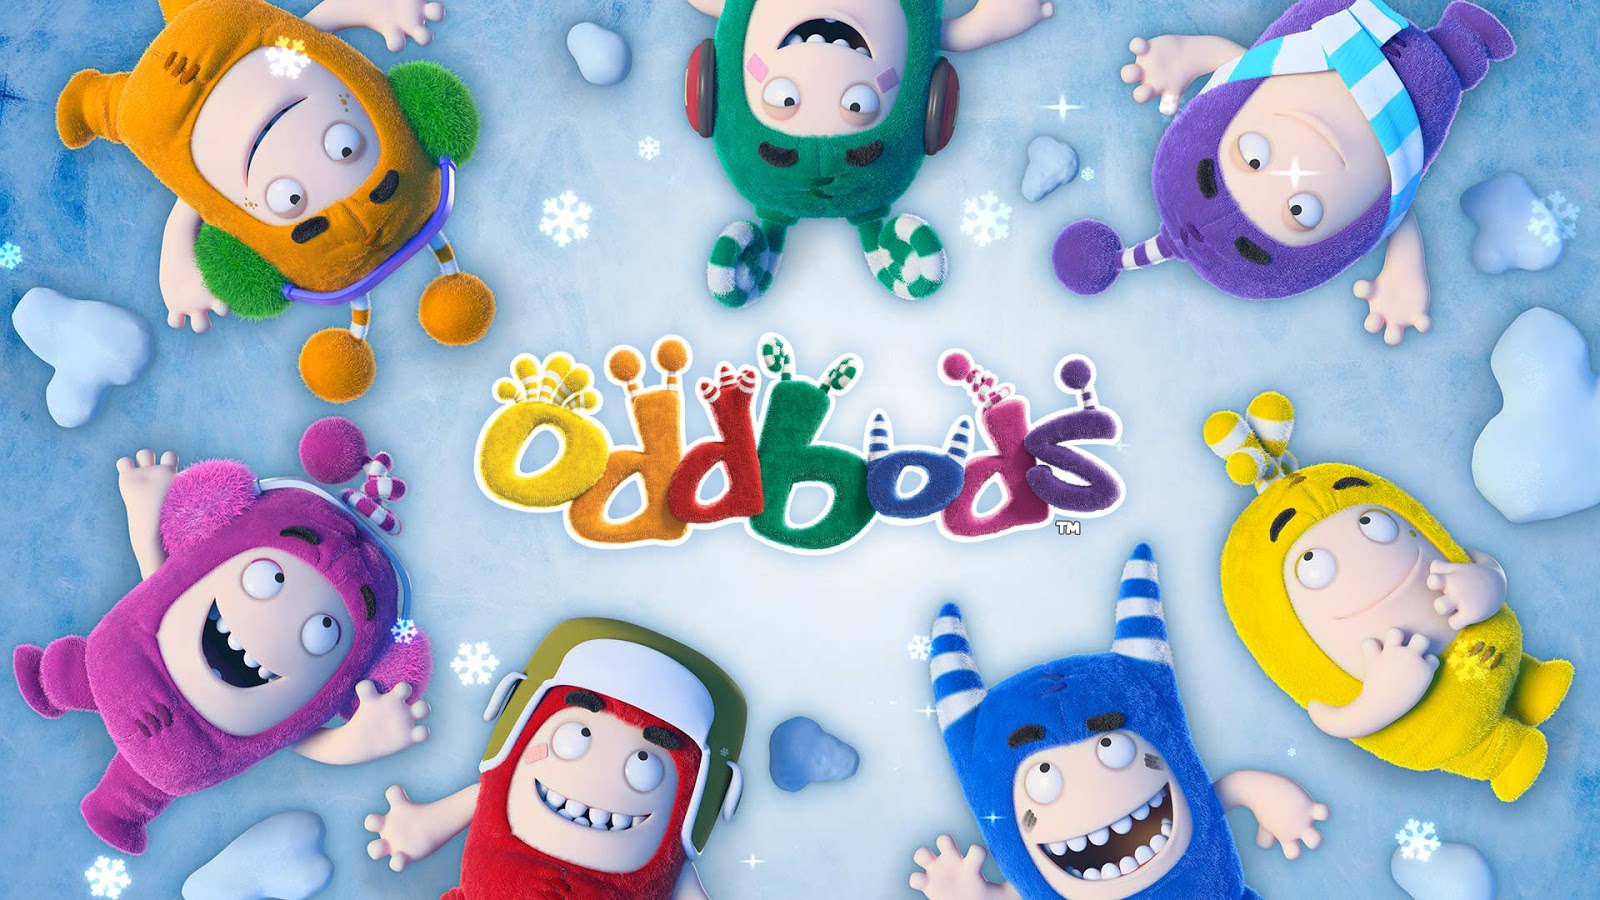 Oddbods Run Wallpaper  Latest version for Android  Download APK